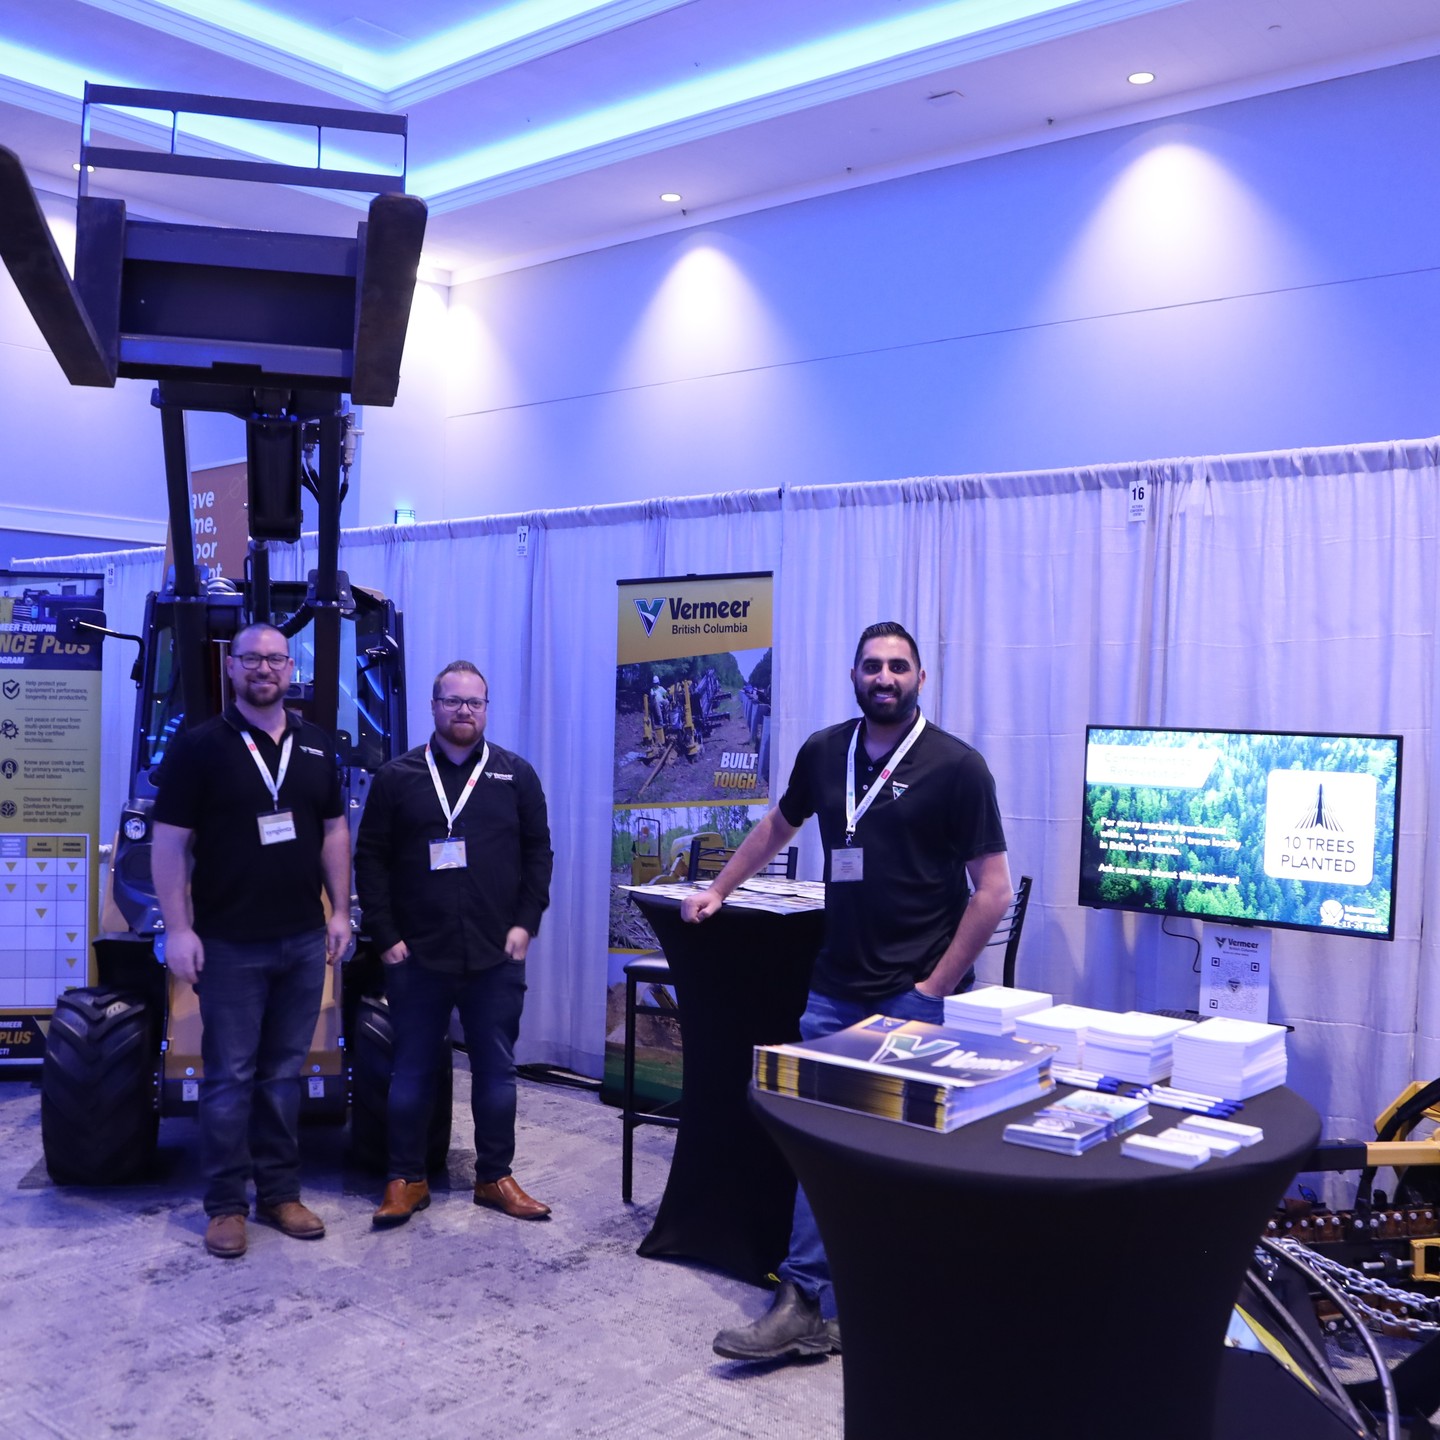 We're glad to have had the opportunity to speak to many of the over 500 attendees of WCTA 2024 in Victoria BC!

We had a fantastic ATX720 on display with a range of attachments to show just how versatile Vermeer's lineup is for landscaping and turf work. Contact us to find out how we can help with your needs.

#WCTA #Turfgrass #WesternCanada #BritishColumbia #Tradeshow #Victoria #VermeerCanada #Vermeer #vermeerequipment #EquipmentRentals